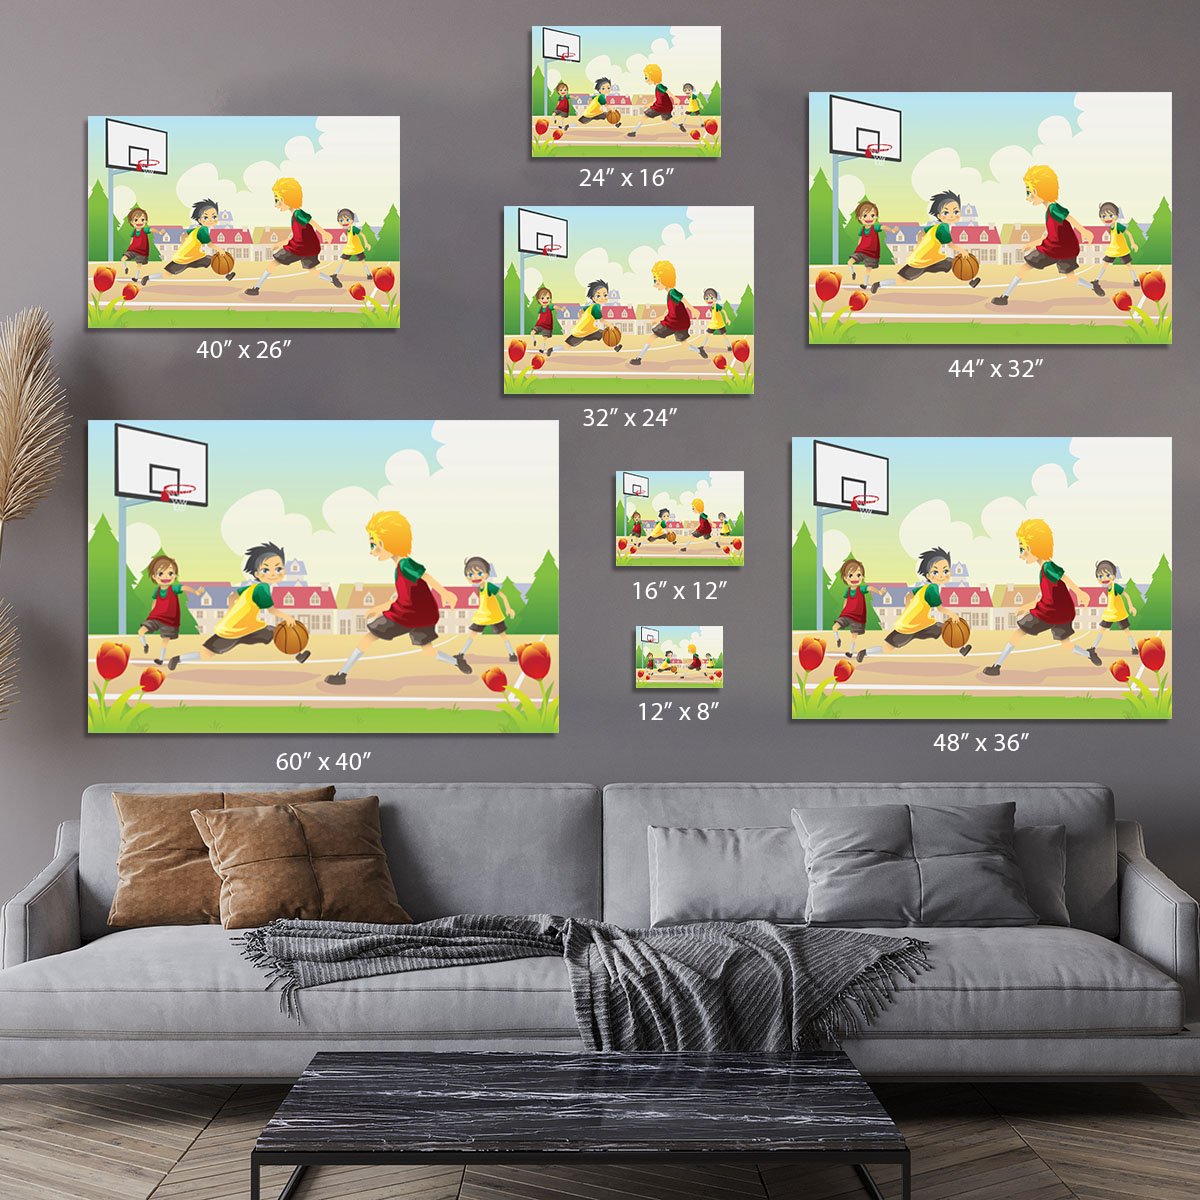 Kids playing basketball in the suburban area Canvas Print or Poster